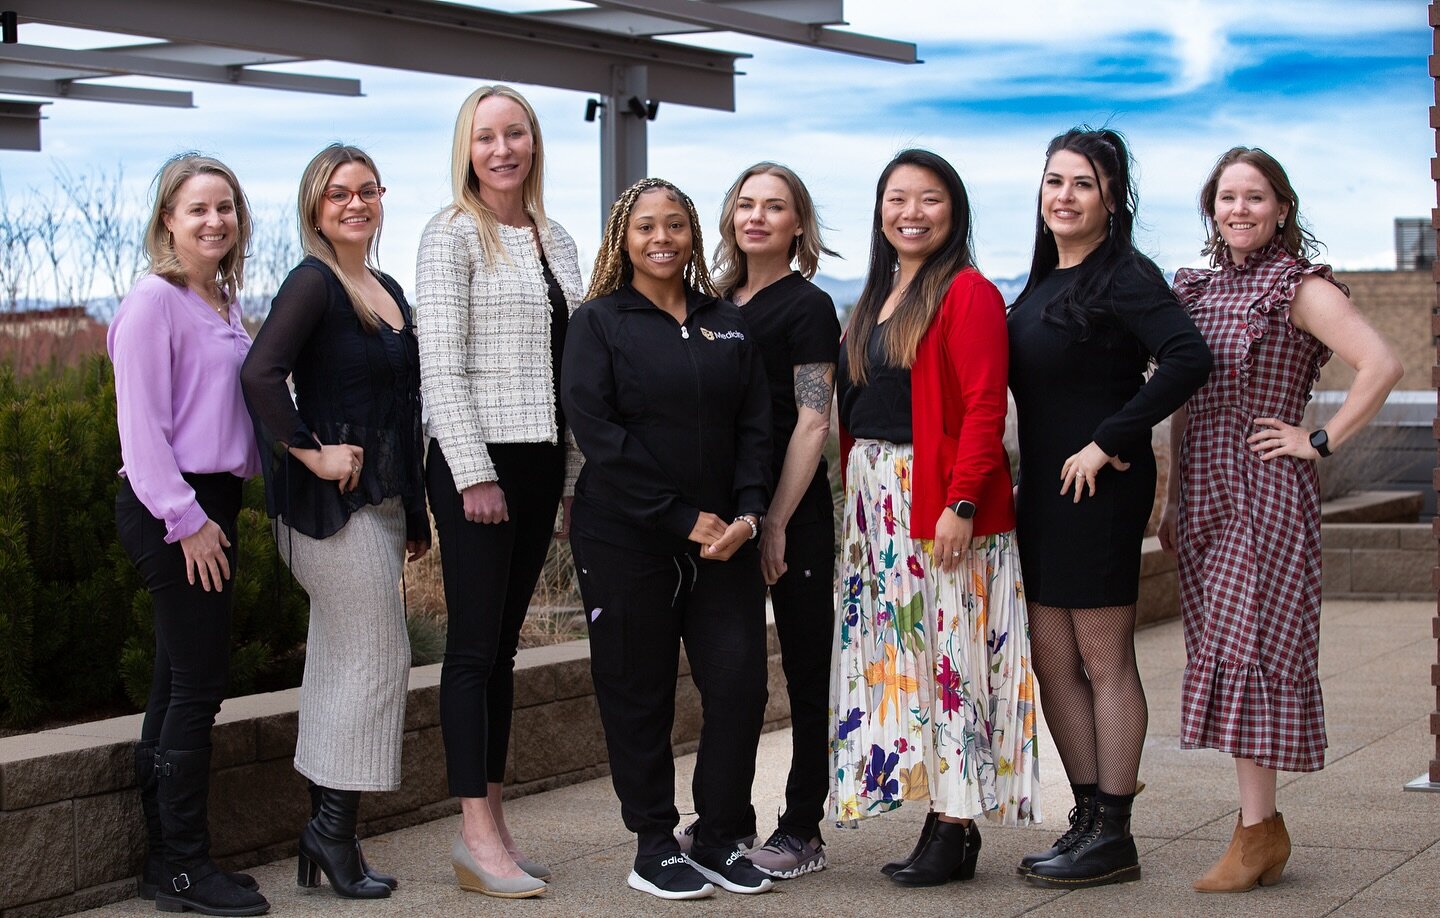 Celebrating #womenshistorymonth by acknowledging this amazing team of women who run CU Medicine Cosmetic Surgery behind the scenes.
L-R: Alina Rich, Kylie Ramirez, Brooke French, MD, Danielle Shields, Morrisa Morin, Jessica Wu, Felicia Martinez and B